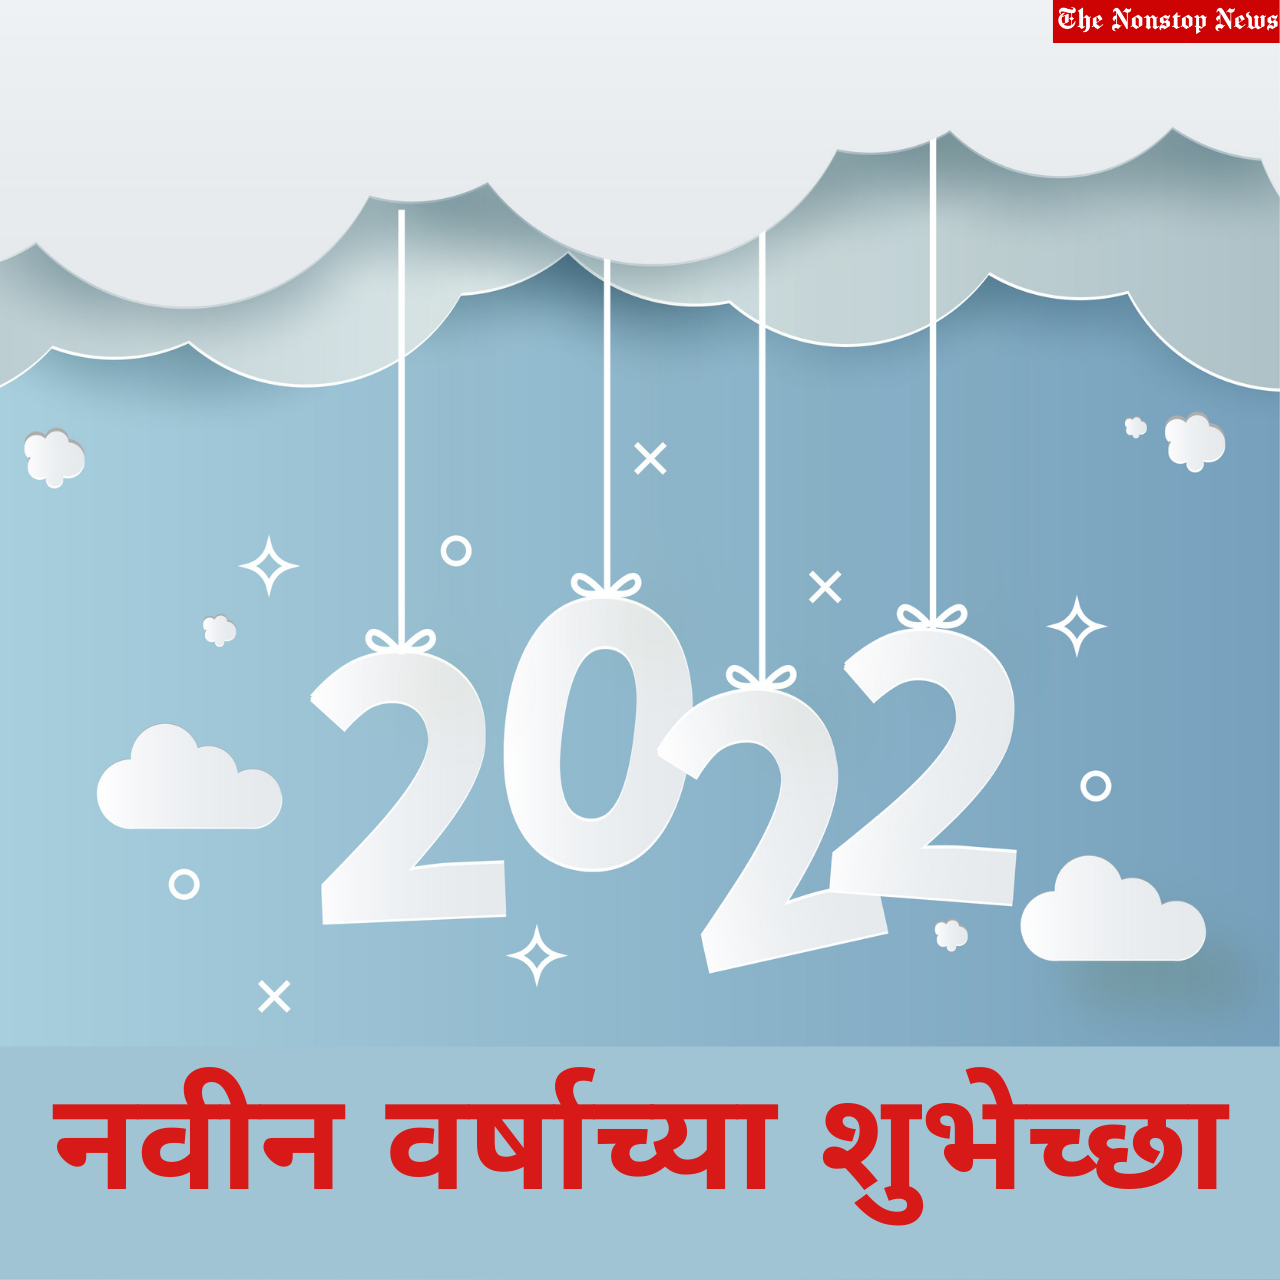 Happy New Year 2022: Marathi Wishes, Quotes, Shayari, Messages, Greetings, and HD Images to greet your near and dear ones